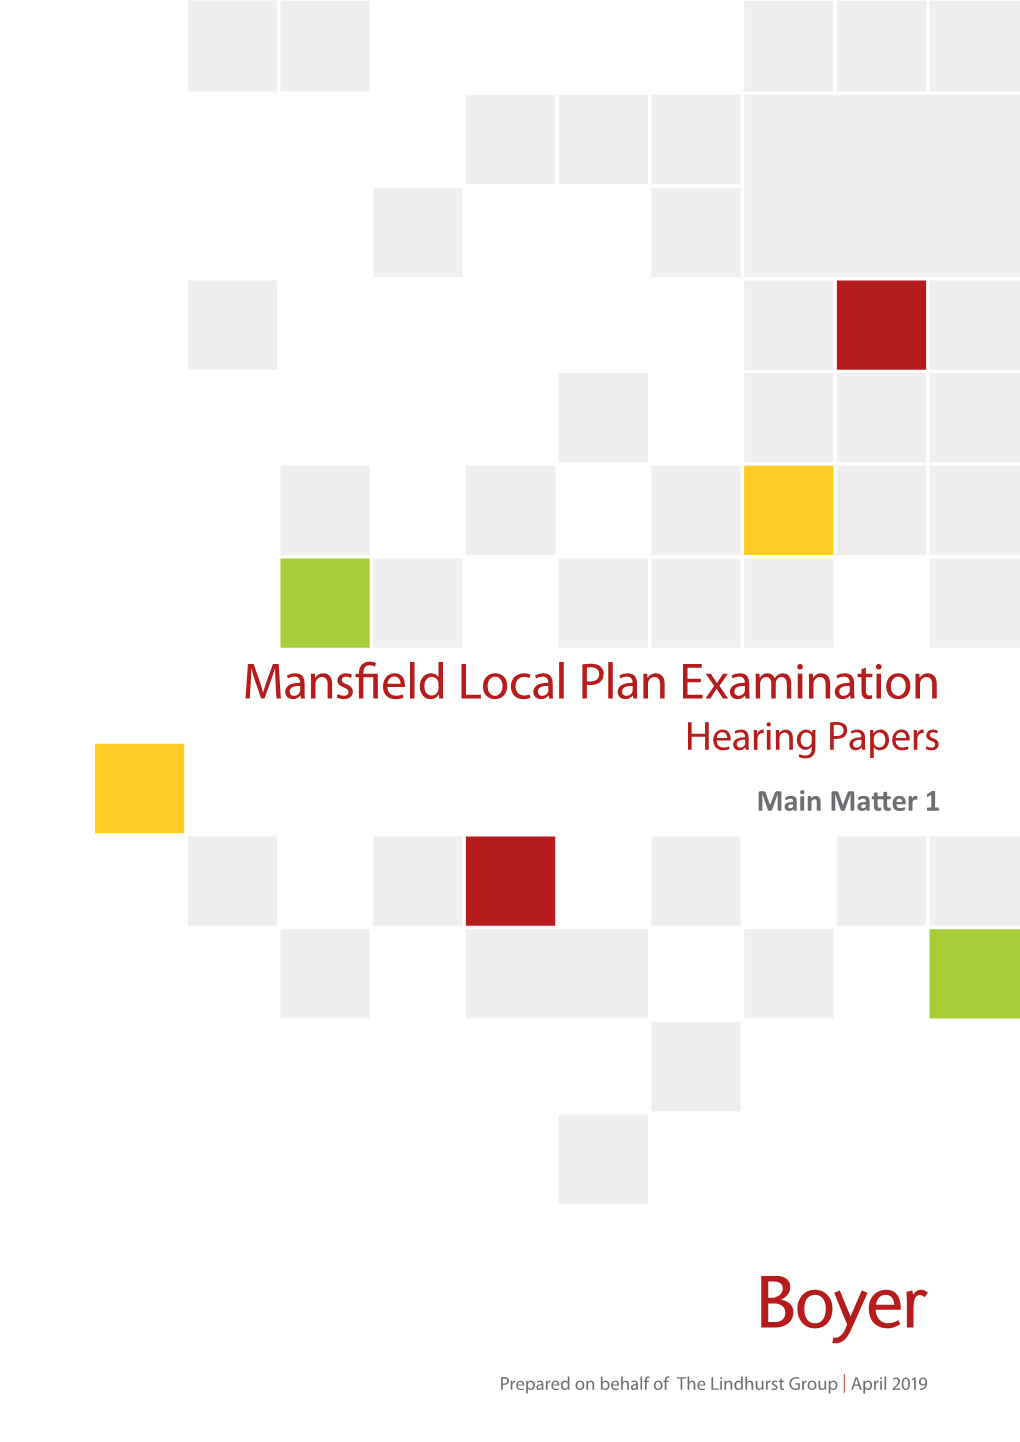 Mansfield Local Plan Examination Hearing Papers Main Matter 1